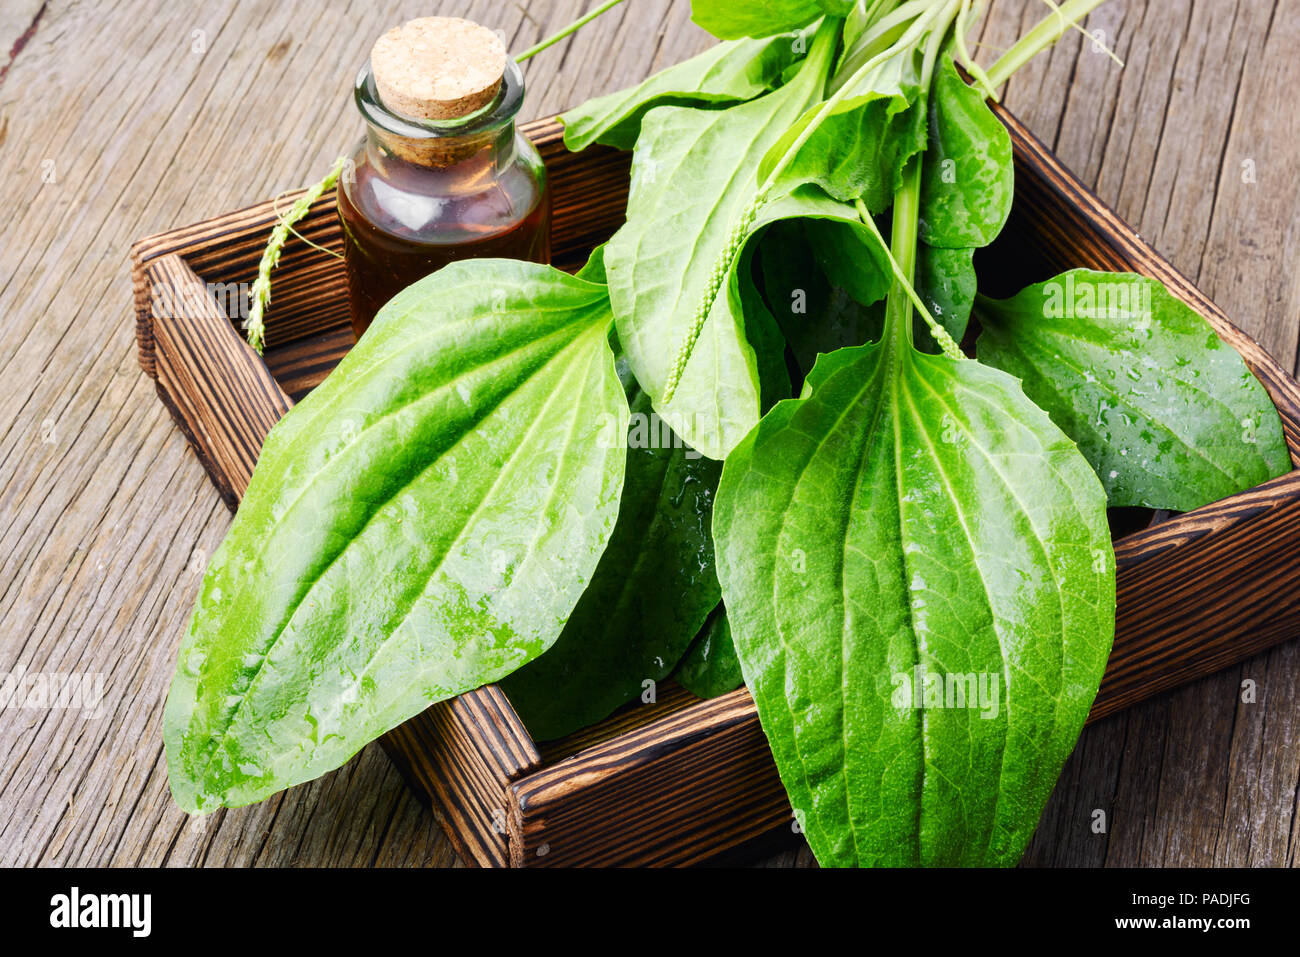 Leaf of greater plantain in a box with mortar and mixture Stock Photo